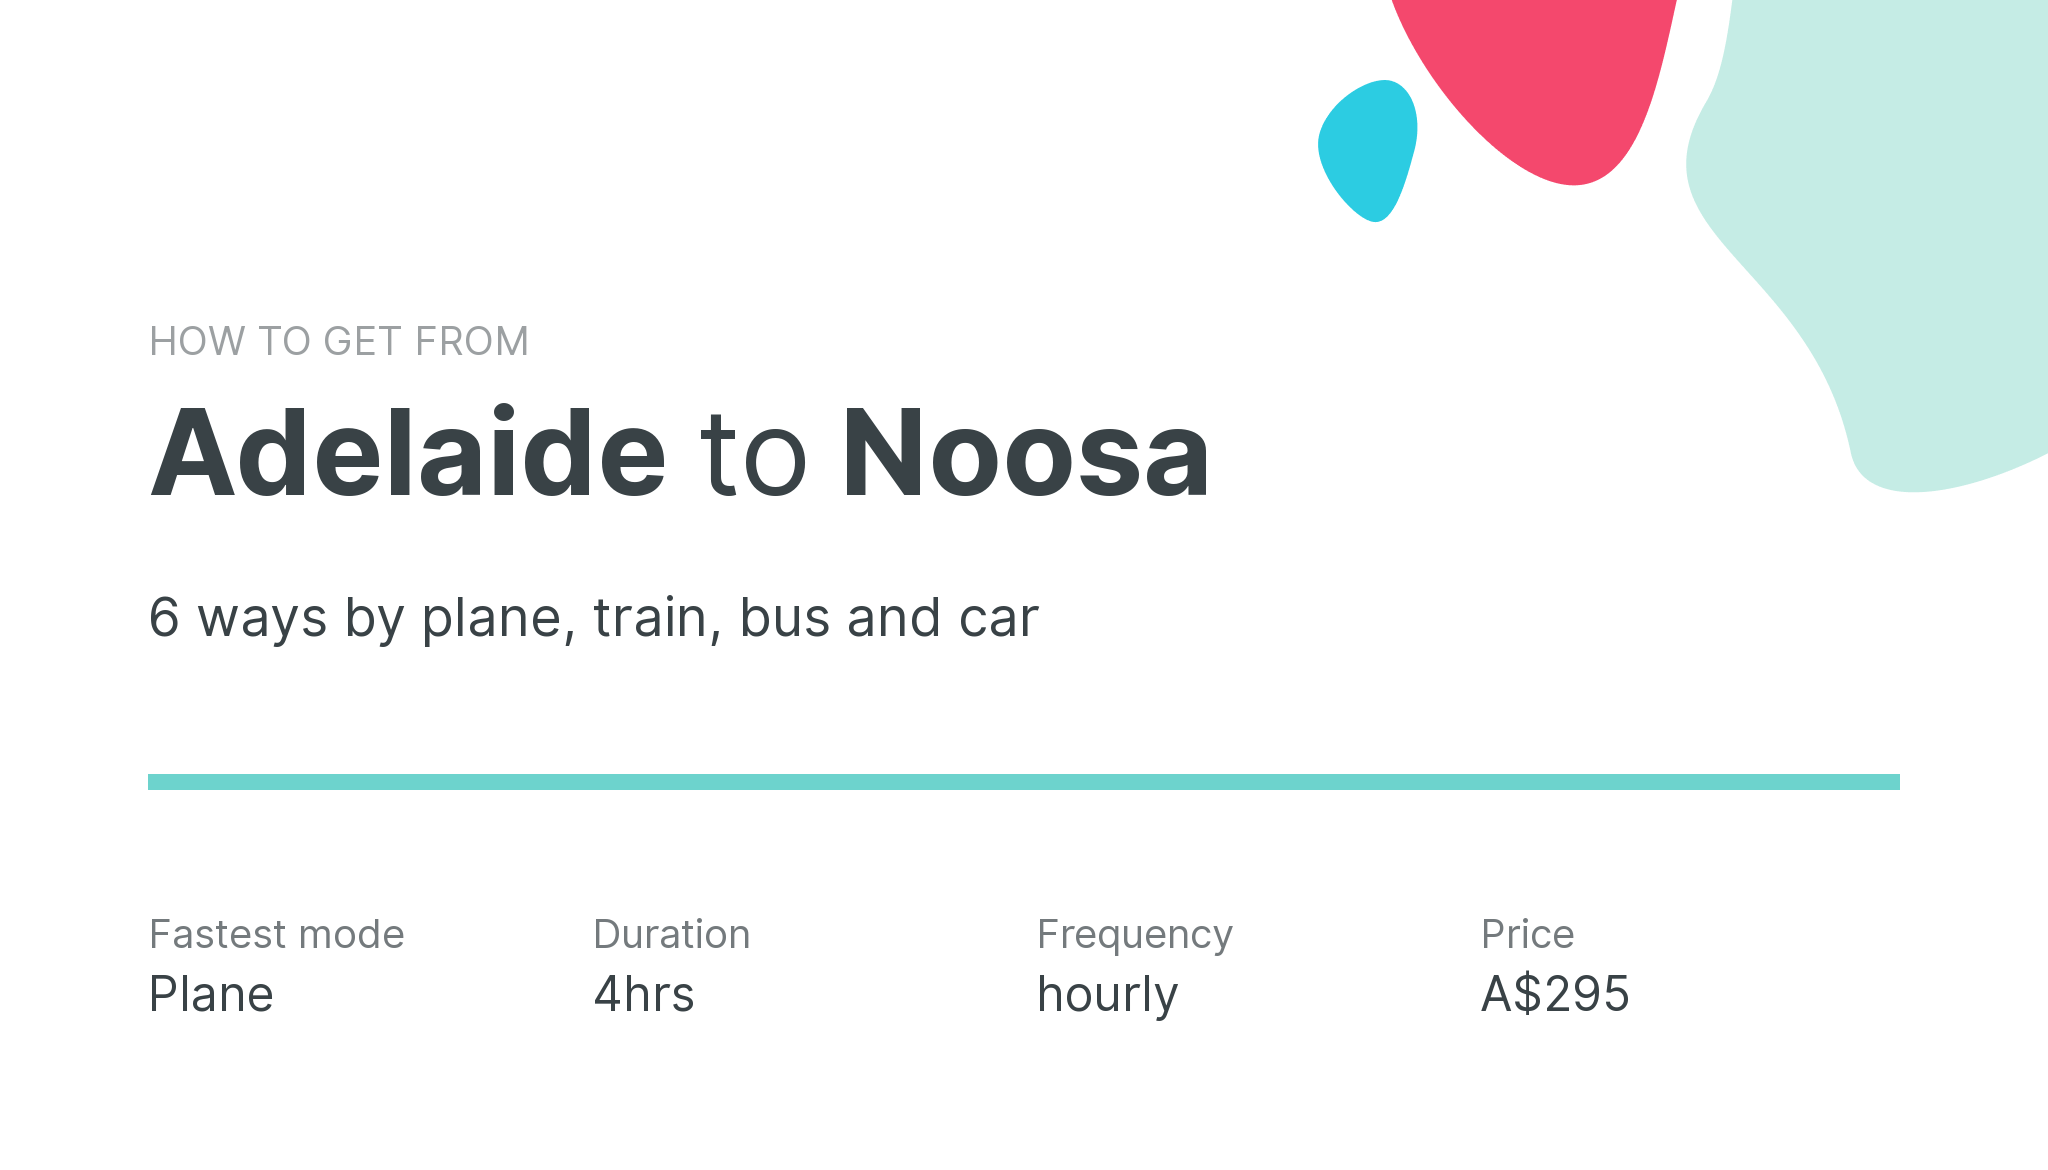 How do I get from Adelaide to Noosa